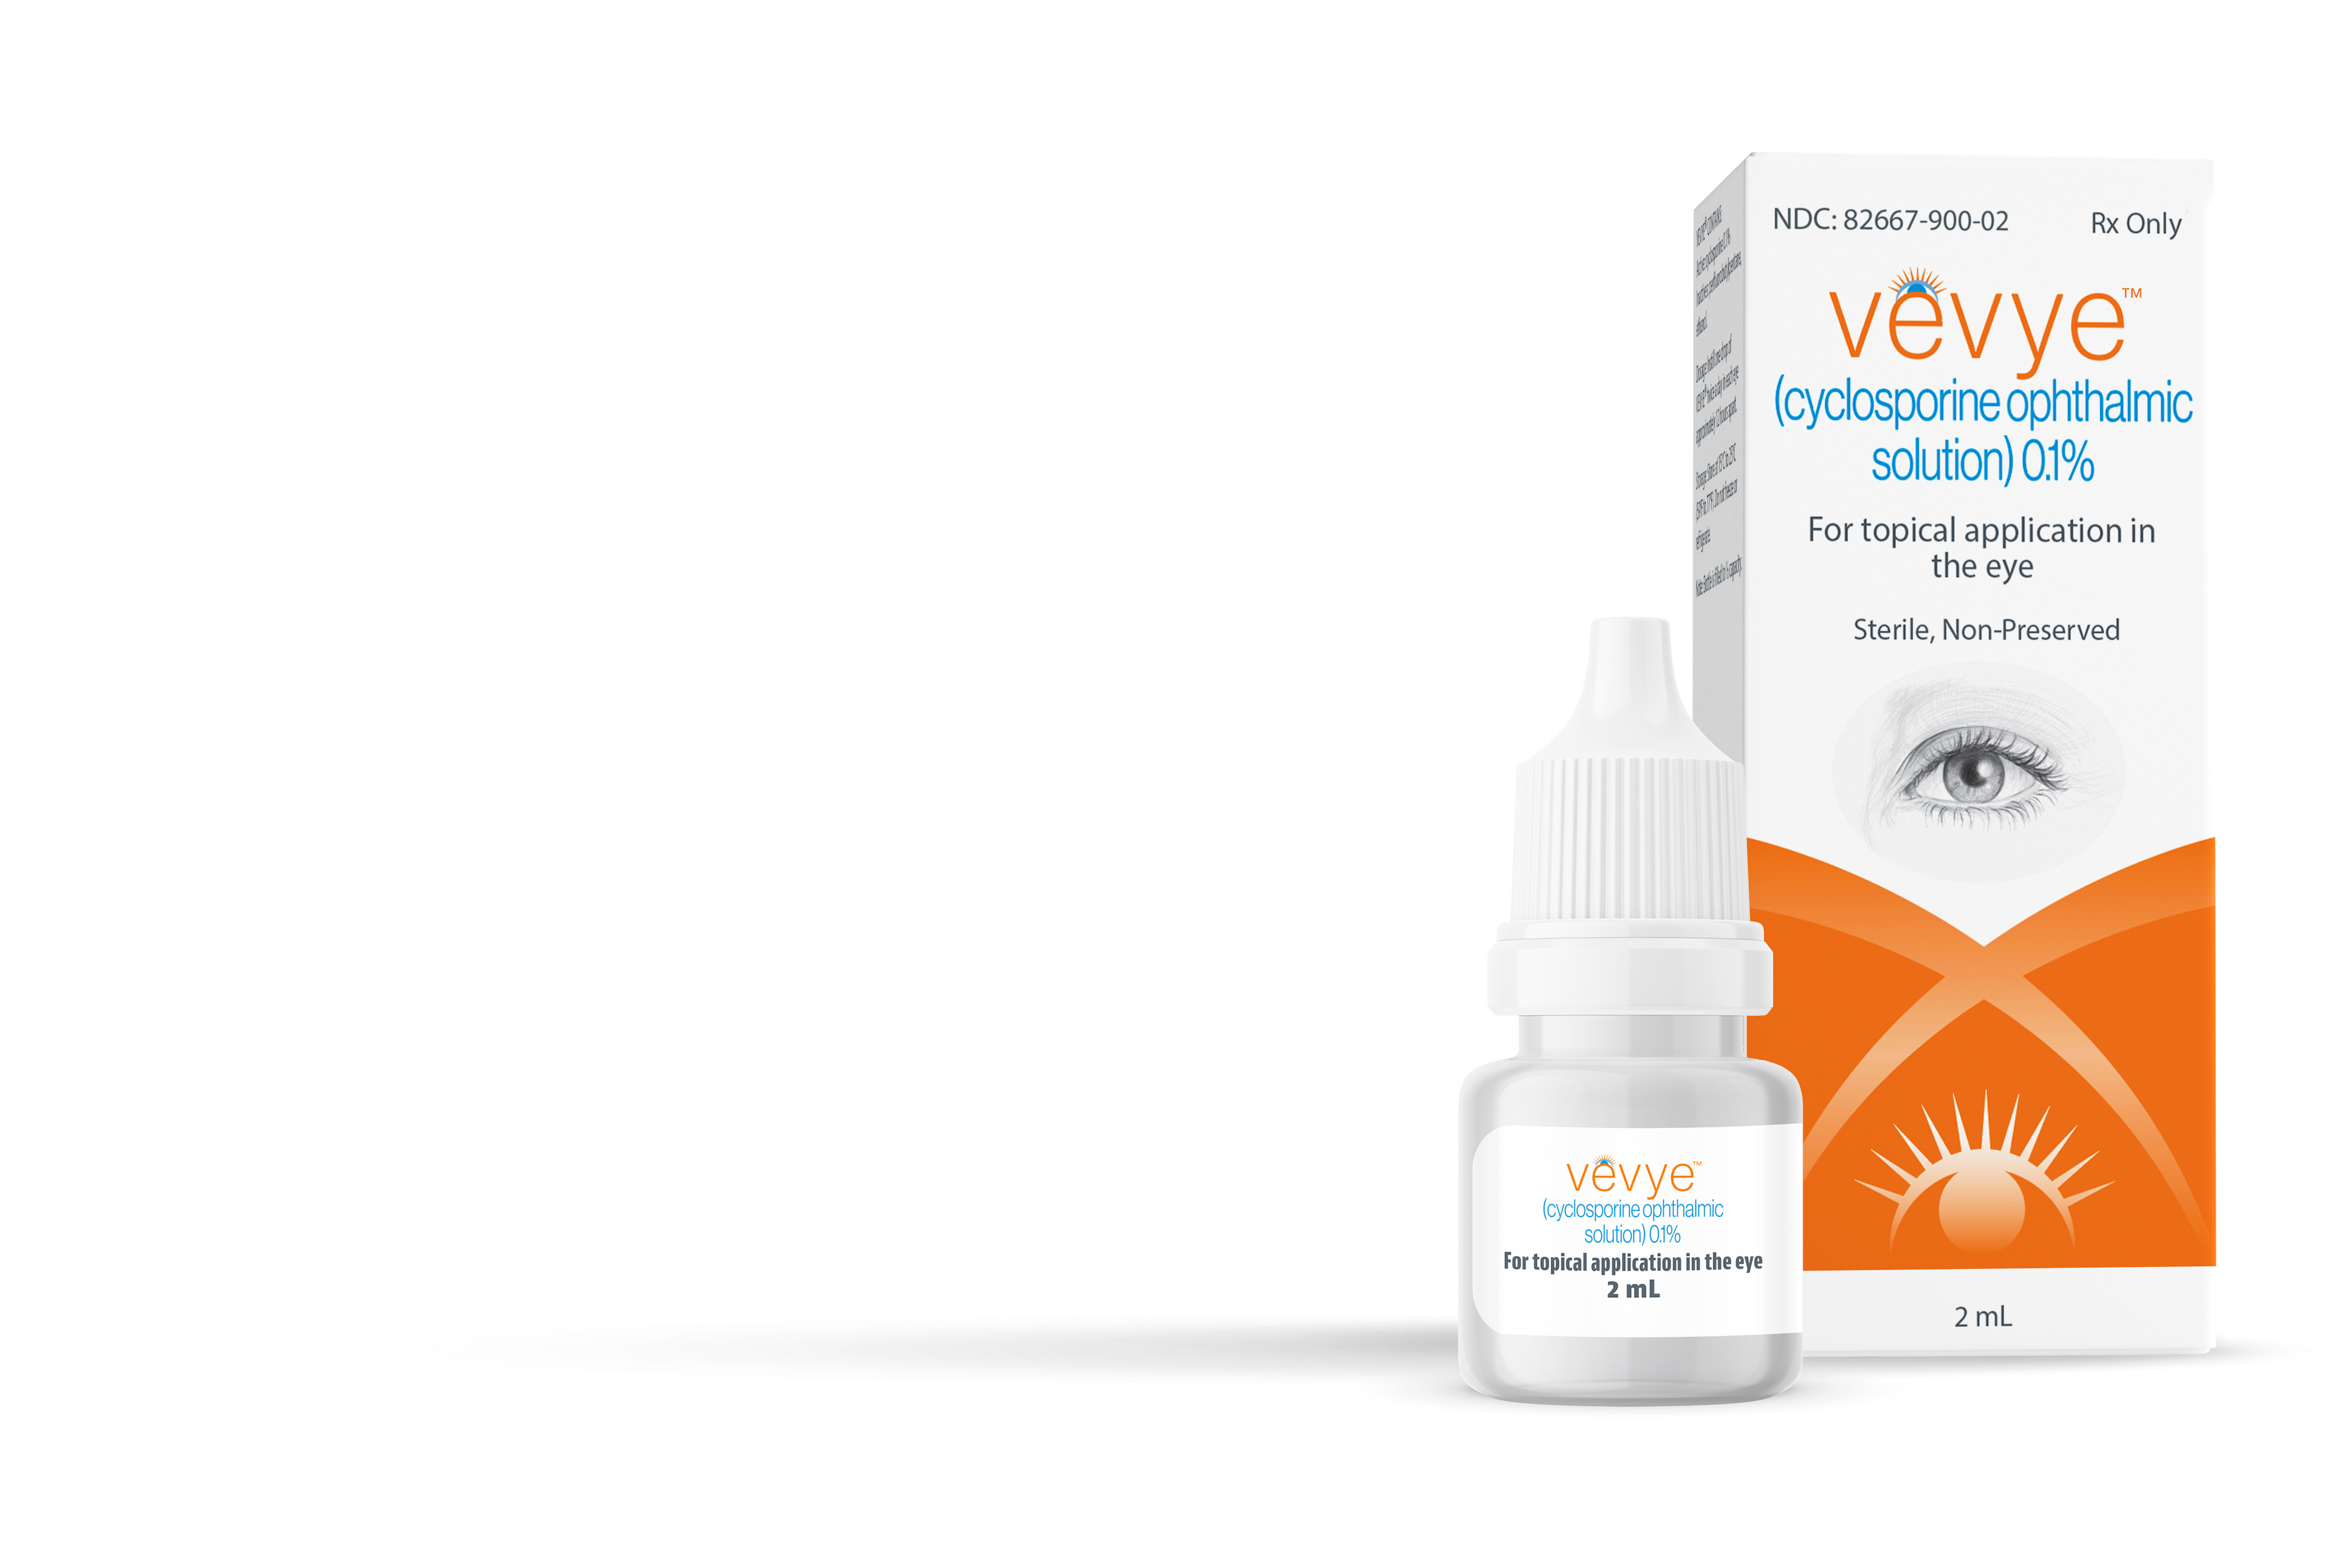 Vevye cyclosporine ophthalmic solution 0.1% is now commercially available in the US